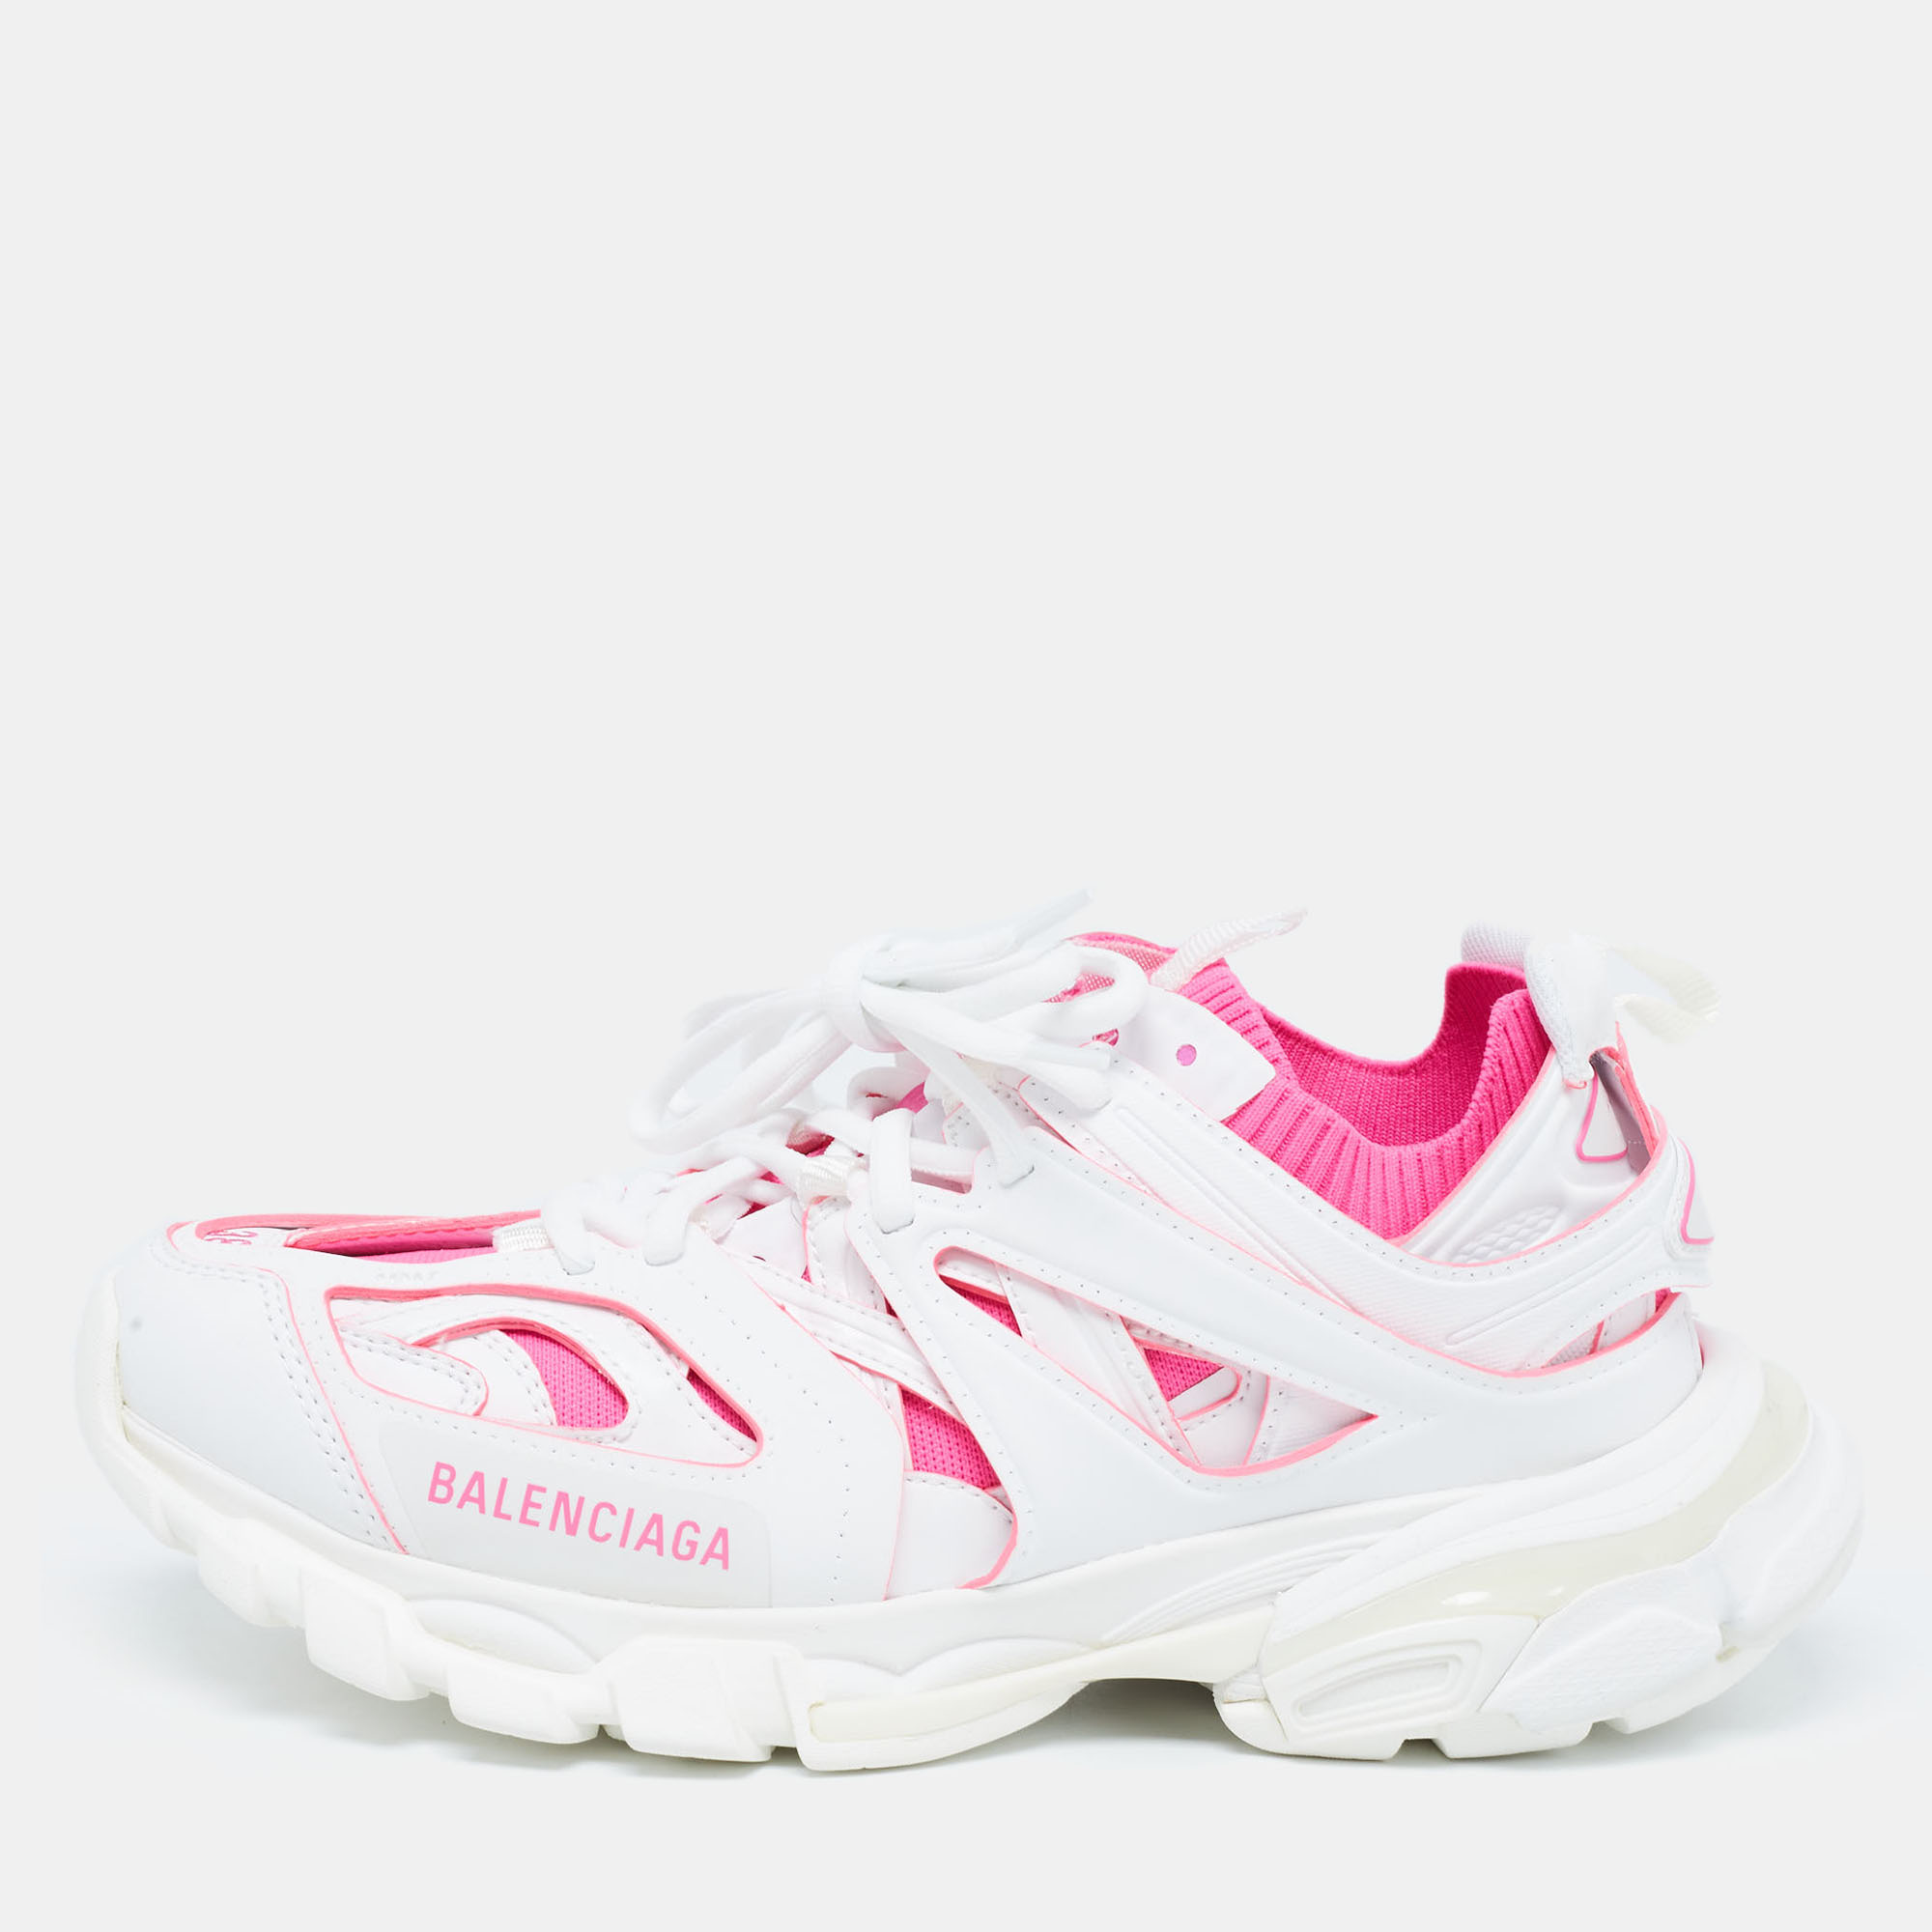 

Balenciaga White/Pink Rubber and Knit Fabric Track Sneakers Size